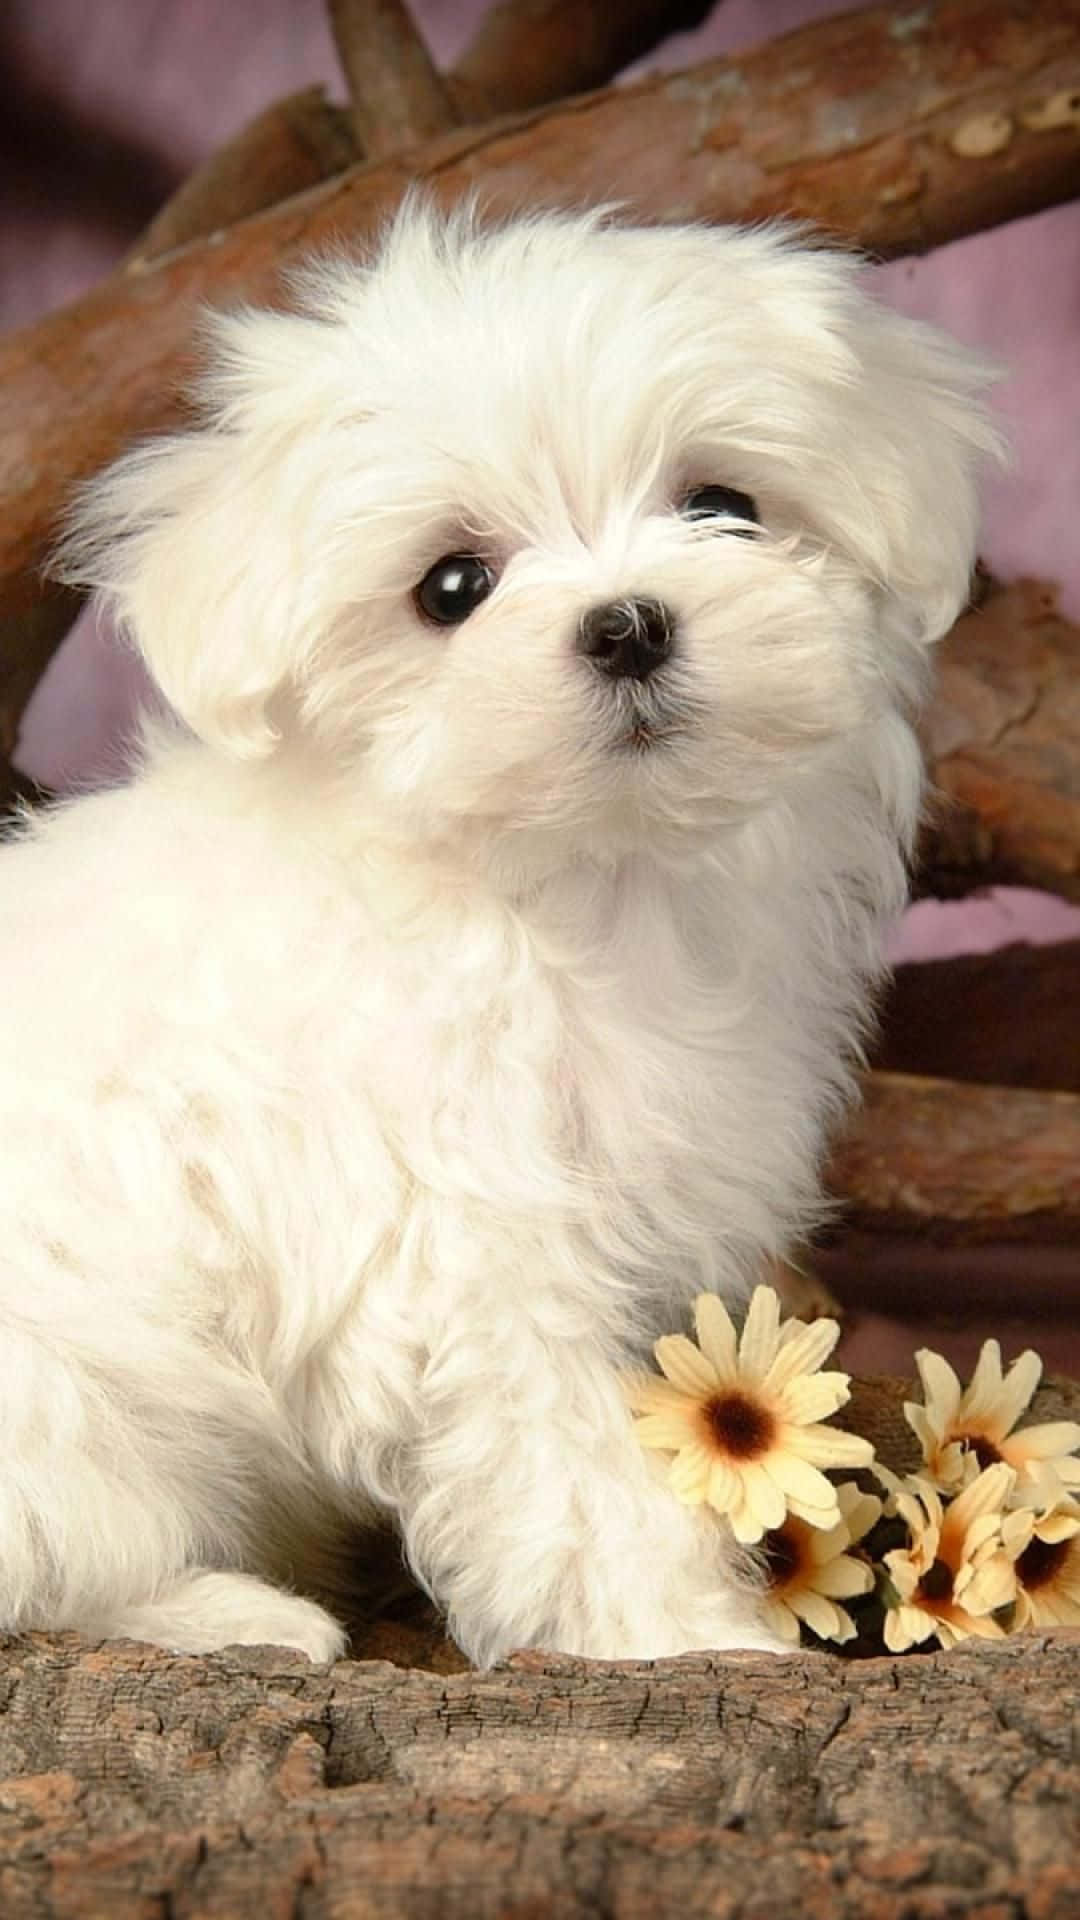 Two Maltese Puppies in a Basket of Flowers